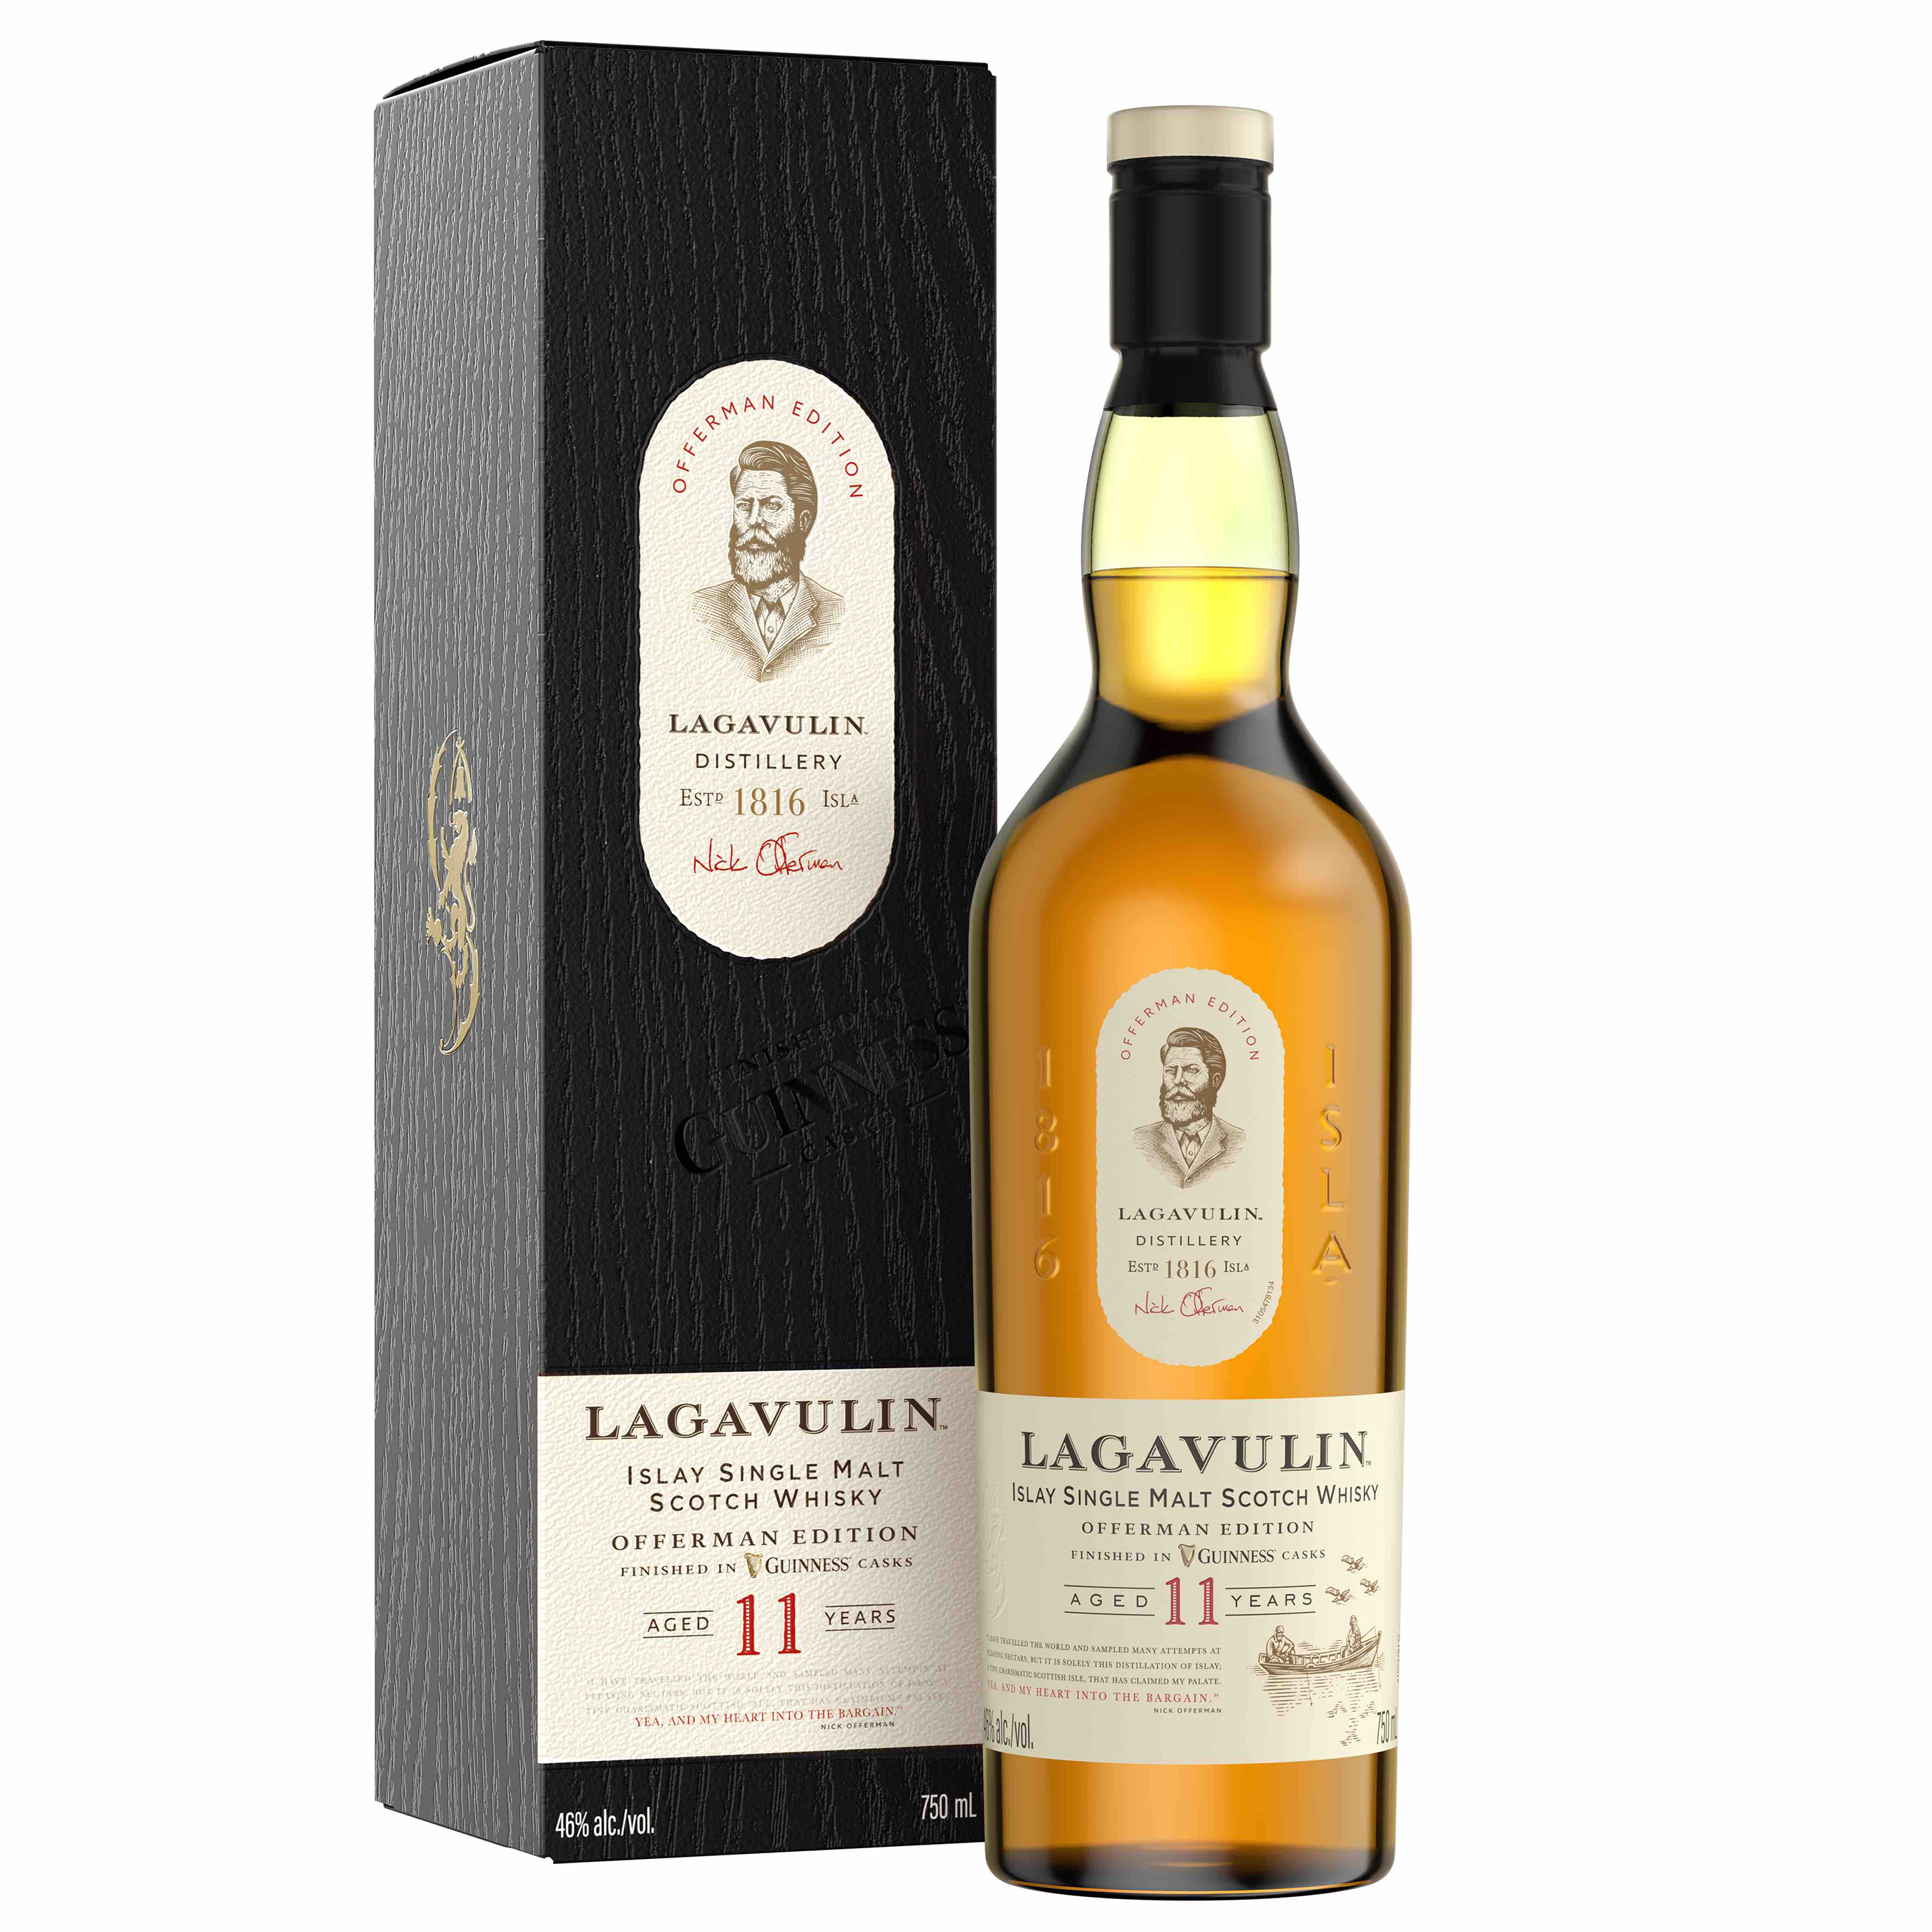 This new, limited-edition 11 Year Old Lagavulin aged for four months in former Guinness Beer casks from the Open Gate Brewery in Maryland is a true father-son creation.